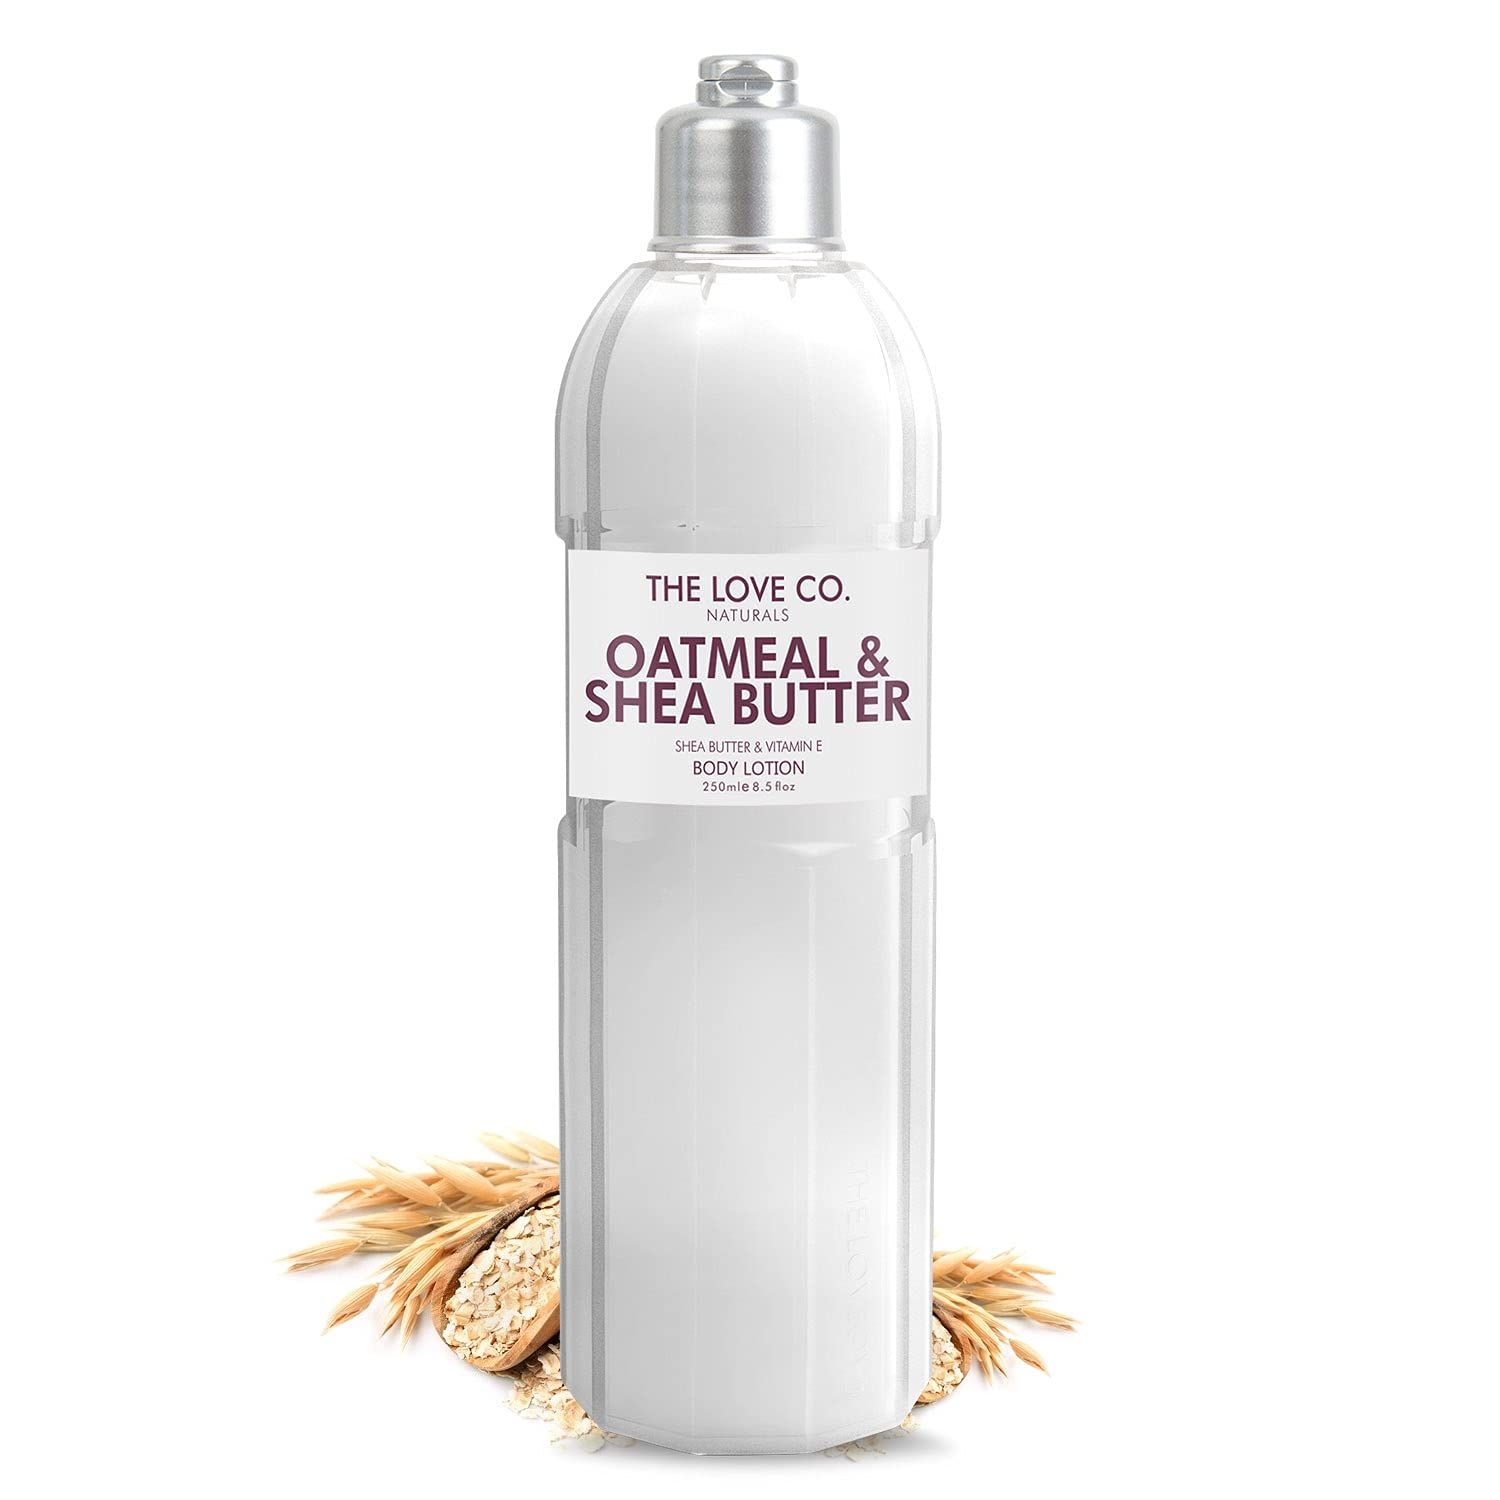 The Love Co. Oatmeal & Shea Butter Extracts Body Lotion For Moisturizer Skin